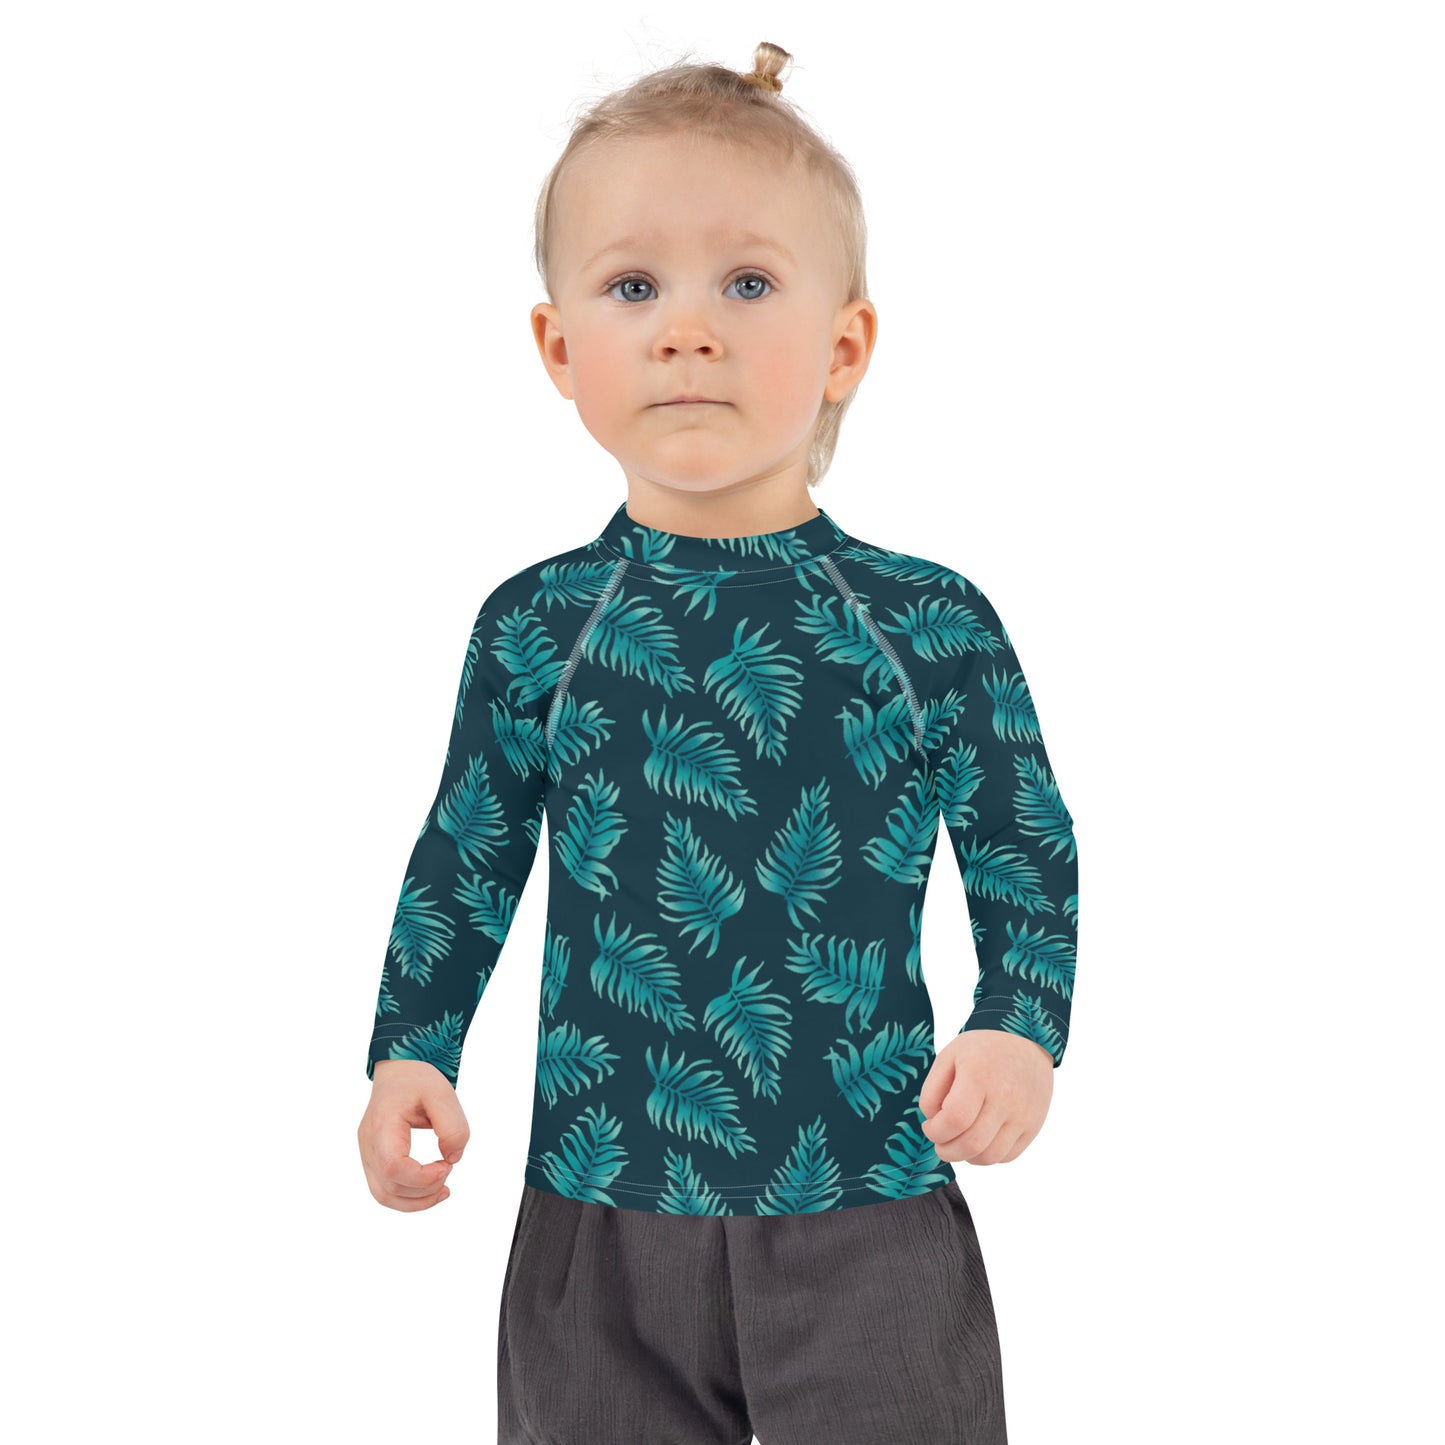 Kids Rash Guard 2T - 7 years - Palm Leaves in Blue Ombre